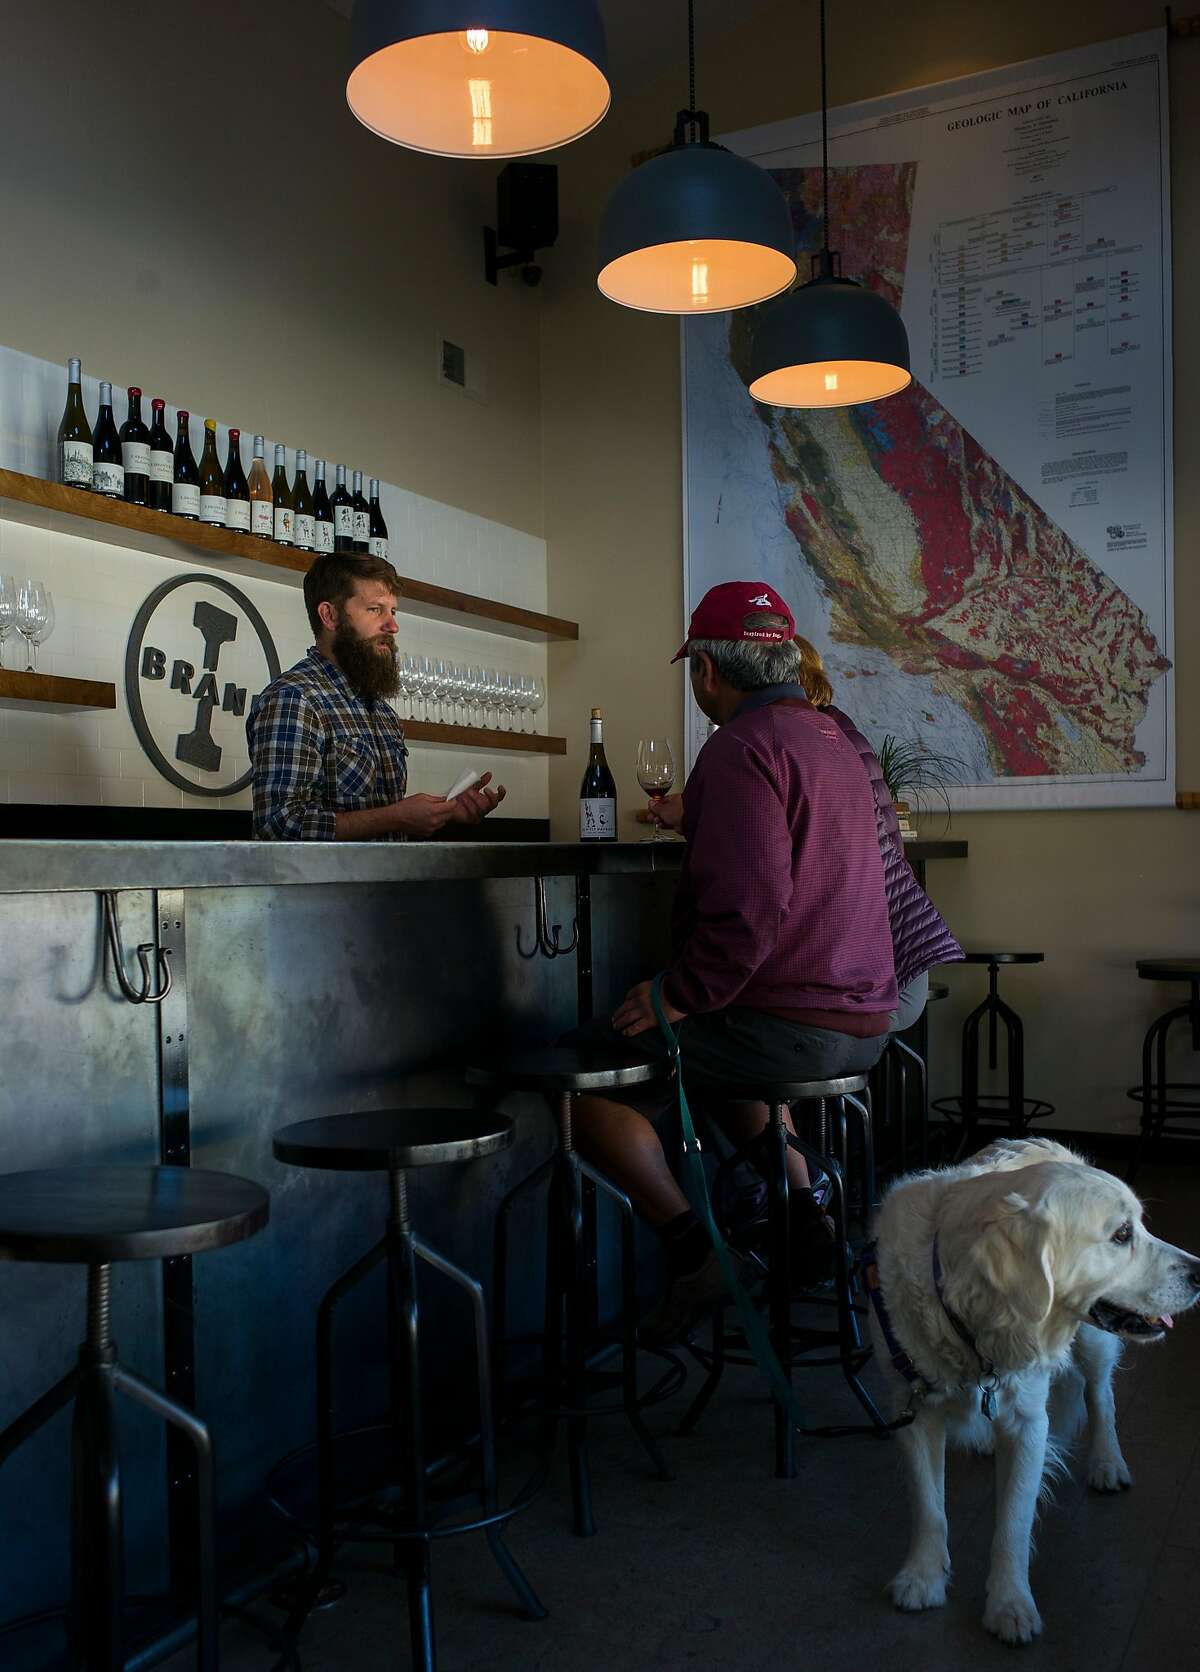 Winemaker Ian Brand (left) talks with customers at the I. Brand and Family tasting room in Carmel Valley, Calif.